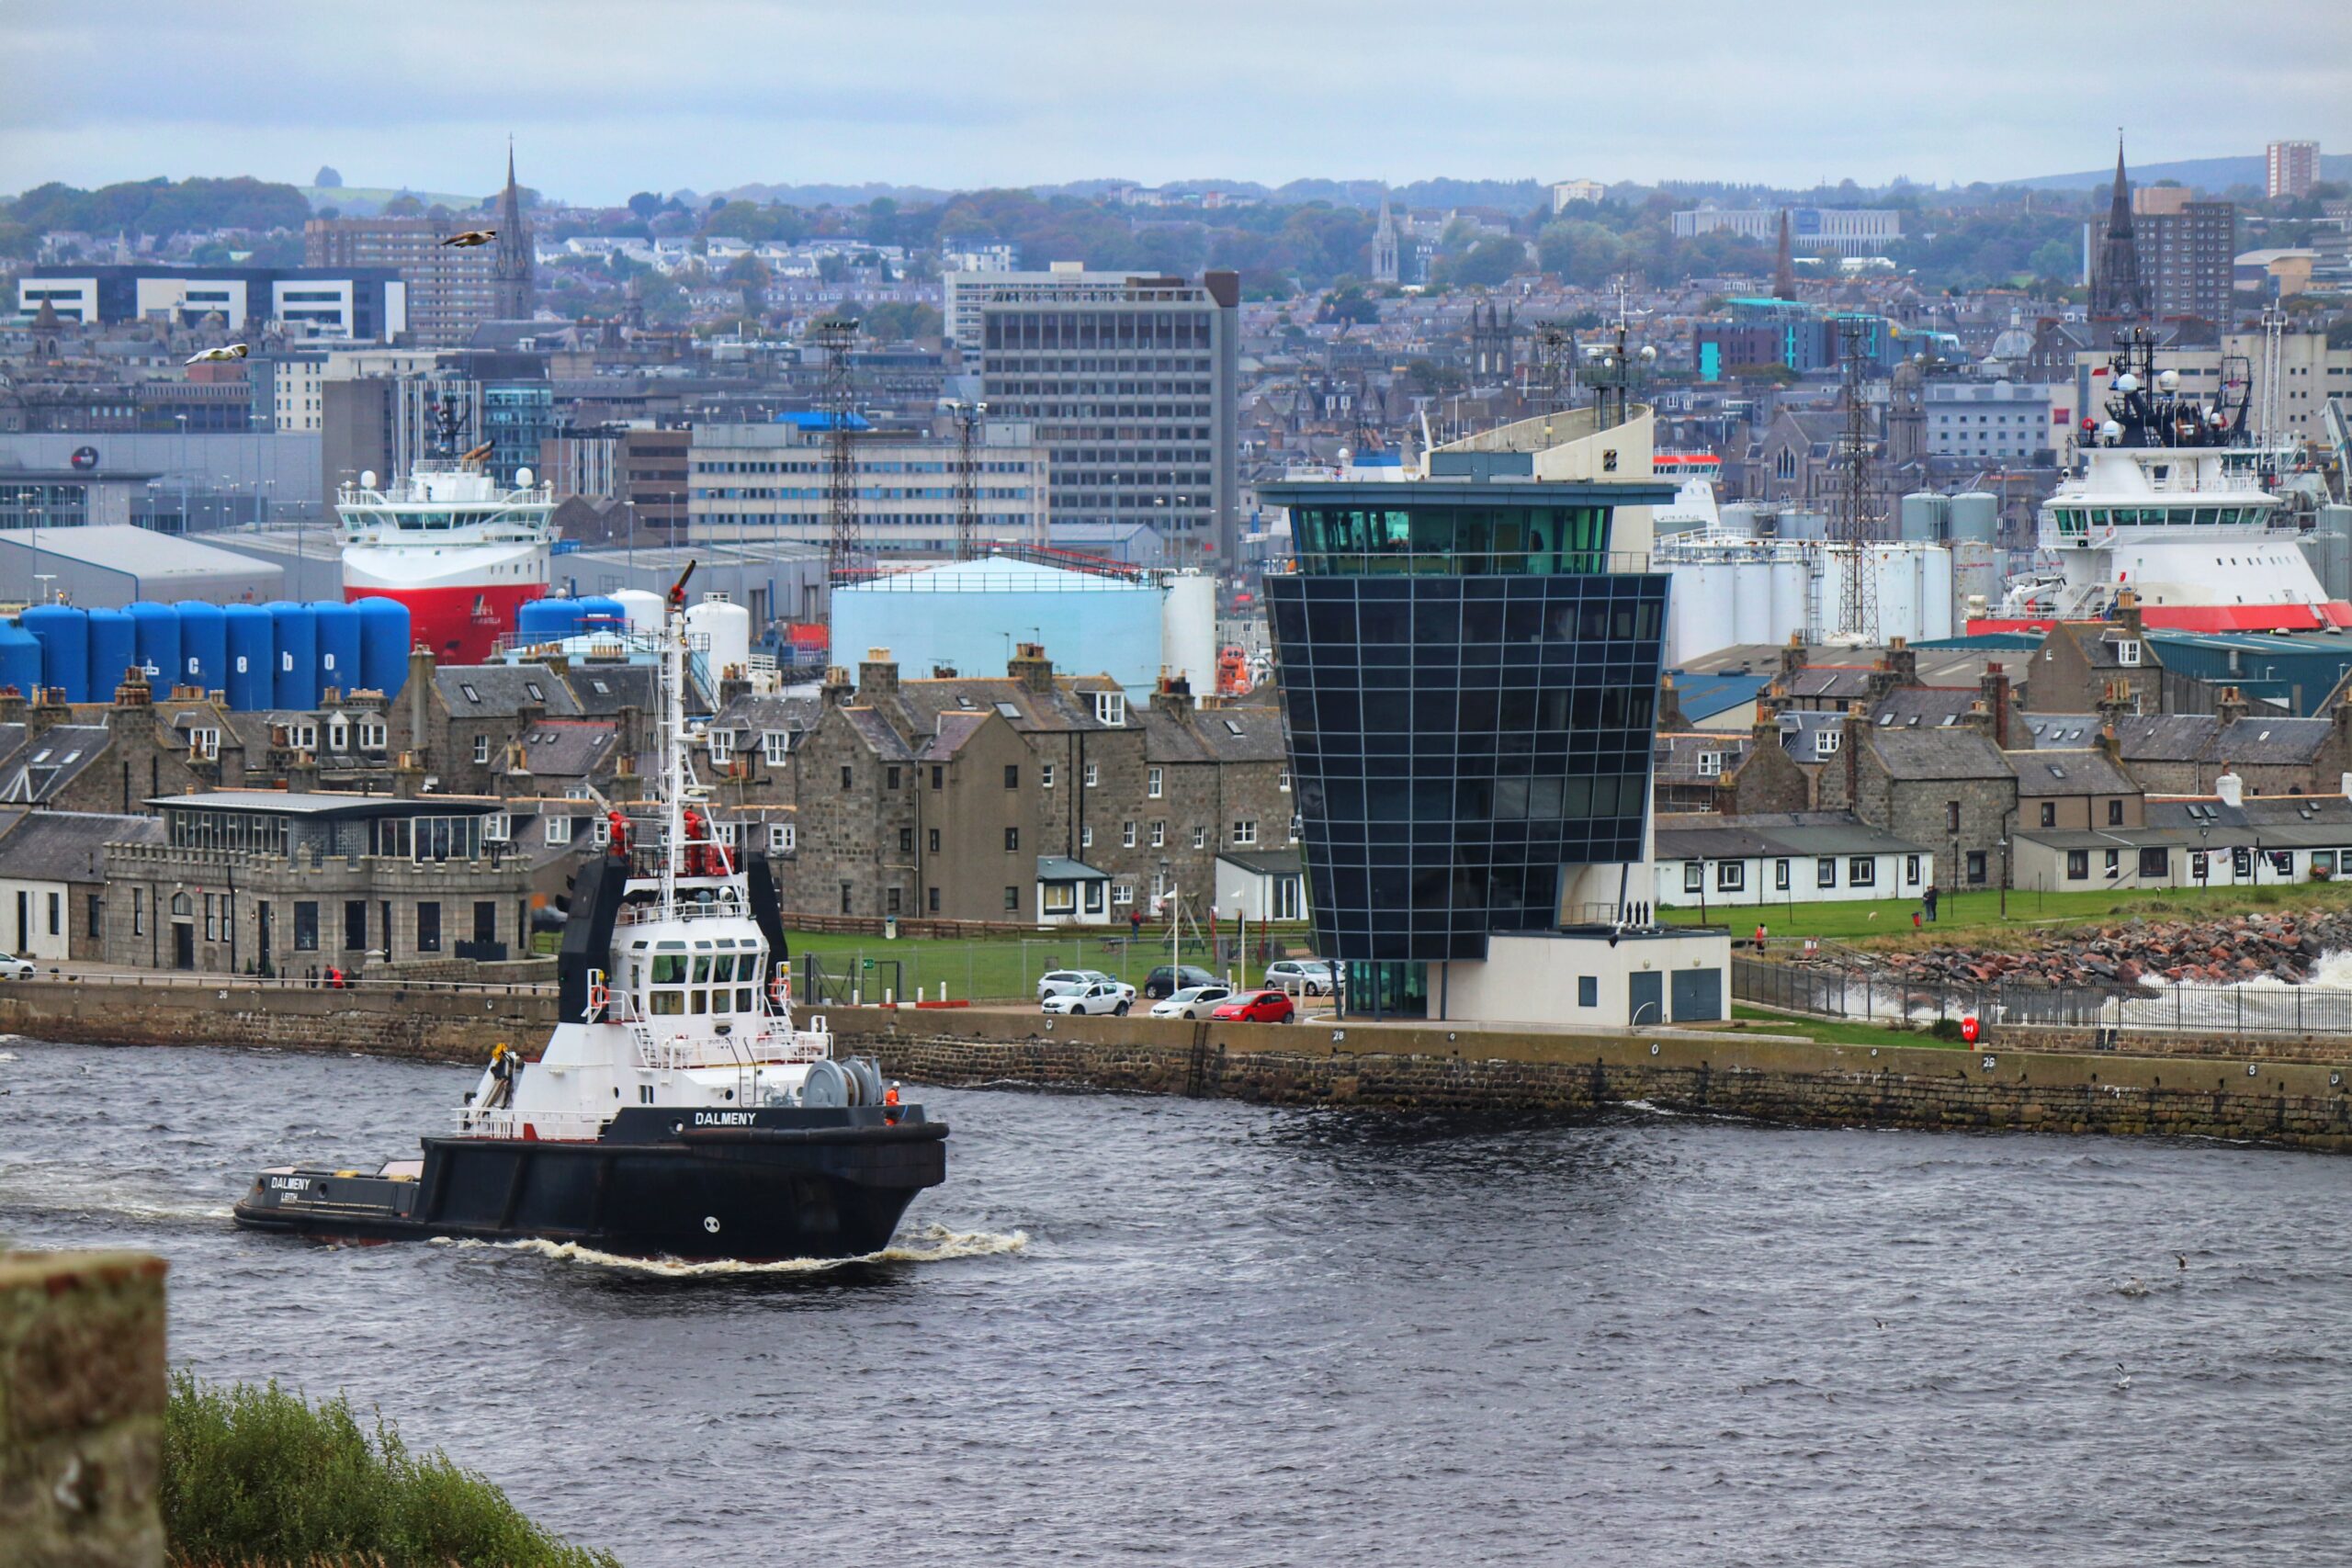 MEMBER NEWS: Port of Aberdeen Visitor Centre reopens to public